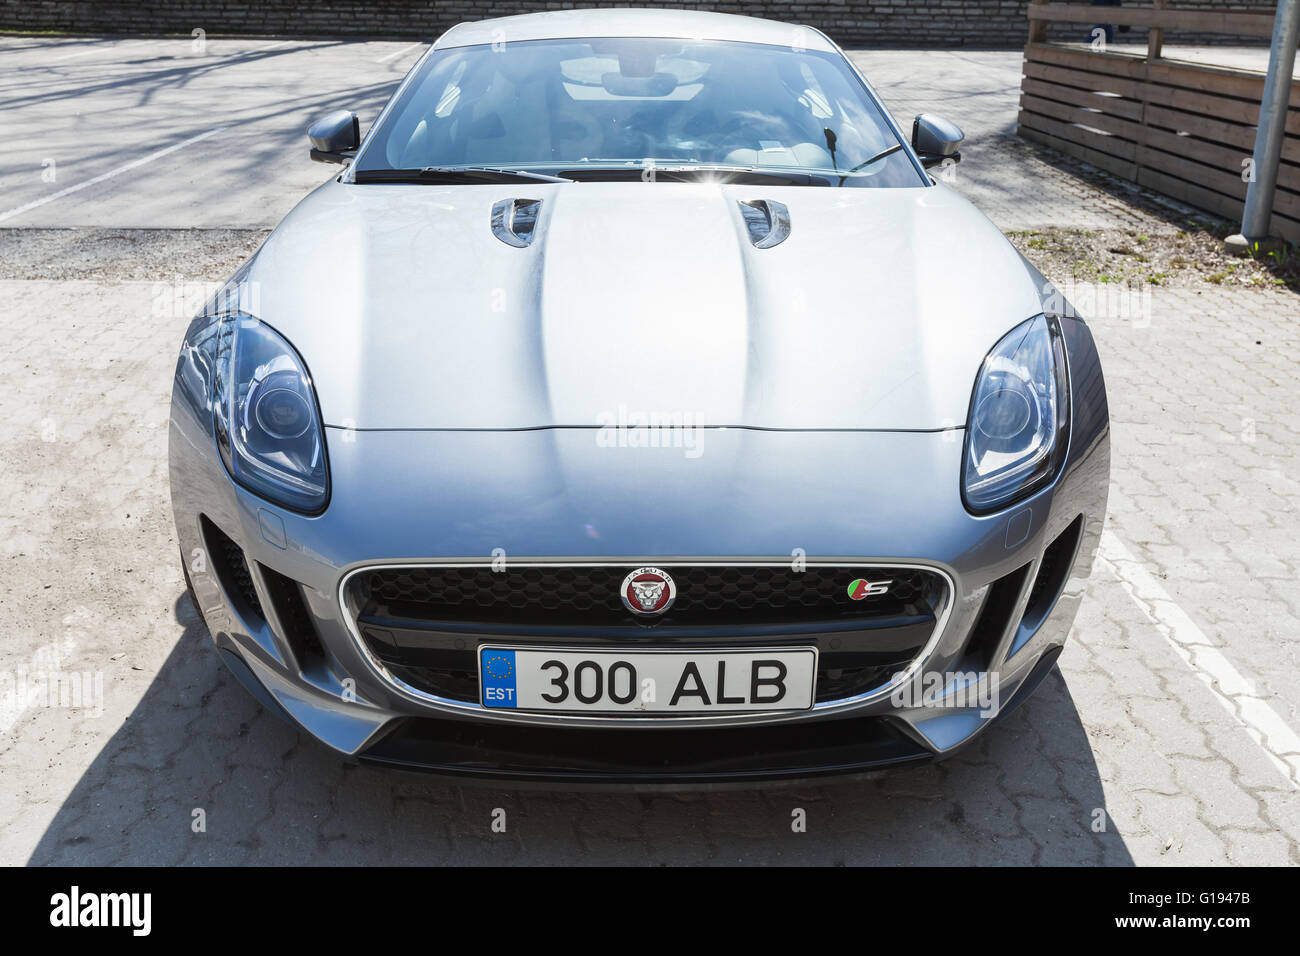 Tallinn, Estonia - May 2, 2016: Jaguar F-Type coupe, closeup front view. Two-seat sports car, based on a platform of the XK conv Stock Photo